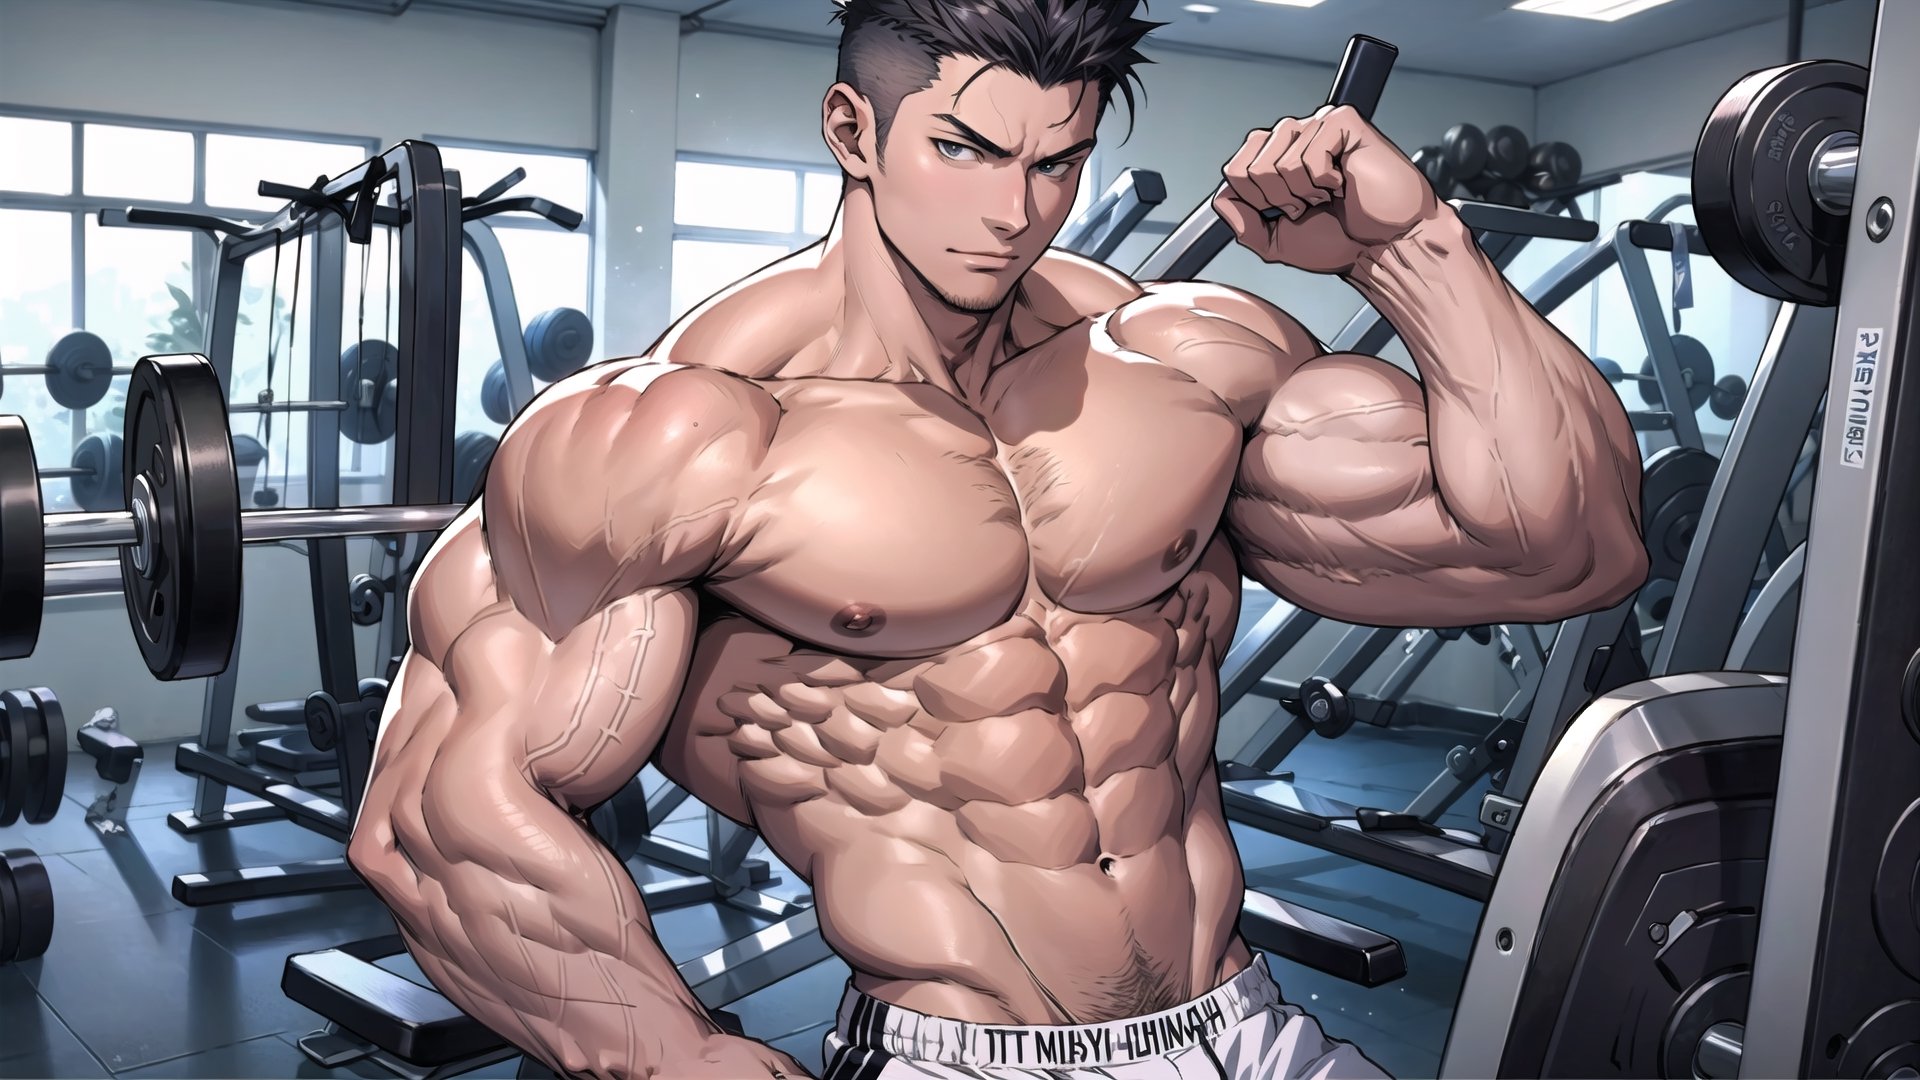 anime young guy,  Medium muscles in a gym,  working out,  Science-Fiction,  Bodybuilding,  inspired by Kim Eung-hwan, topless, medium muscles,  strong shoulders,  inspired by Yeong-Hao Han,  Super buff and cool,  slim but muscular.